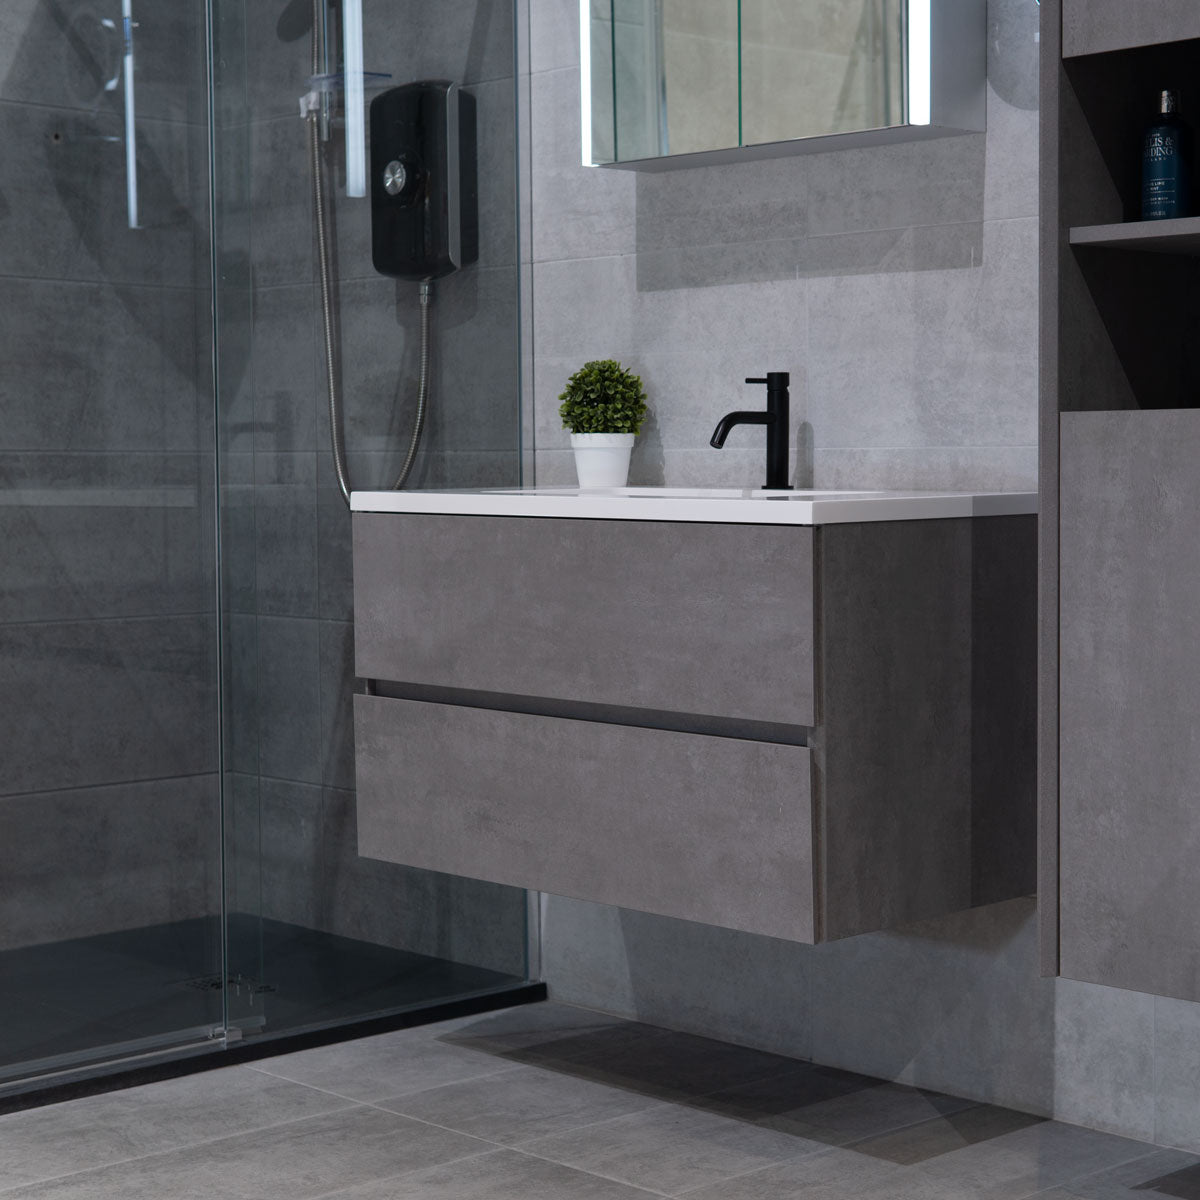 Granlusso Lucca Concrete Double Drawer Vanity Unit Wall Hung With White or Black Basin